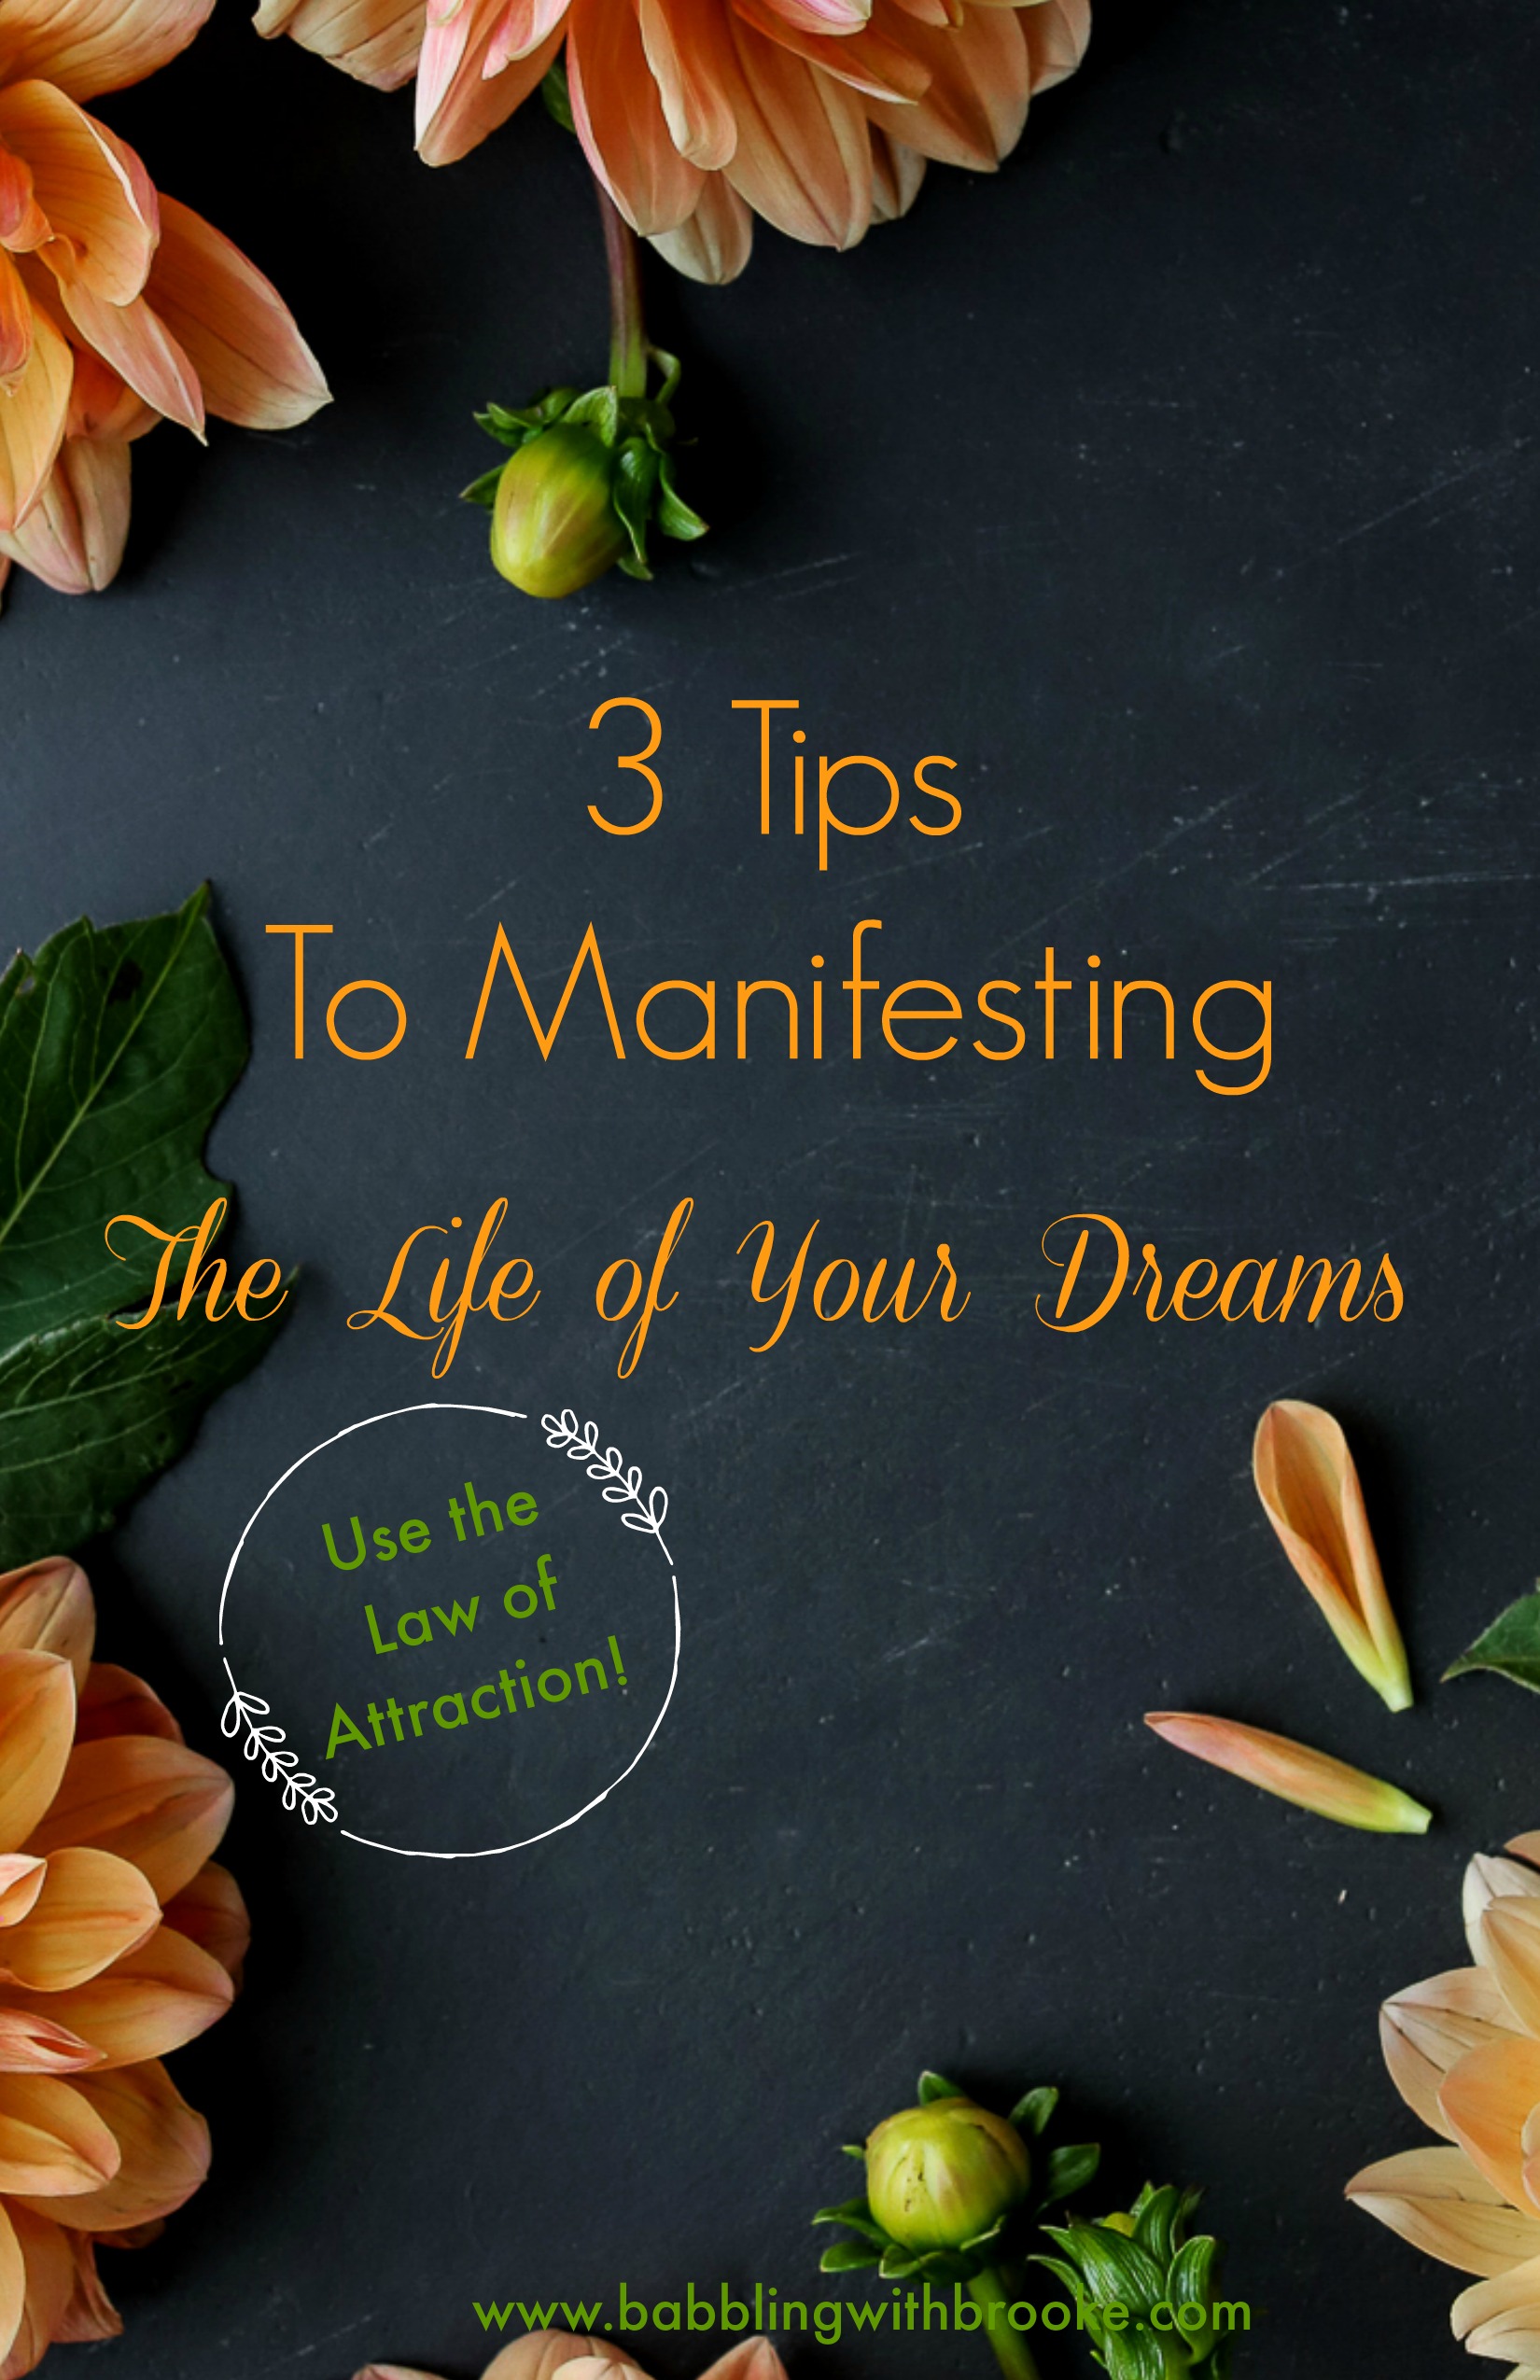 3 easy tips to manifesting your dreams through the law of attraction! #lawofattraction #manifestyourdreams #easytips